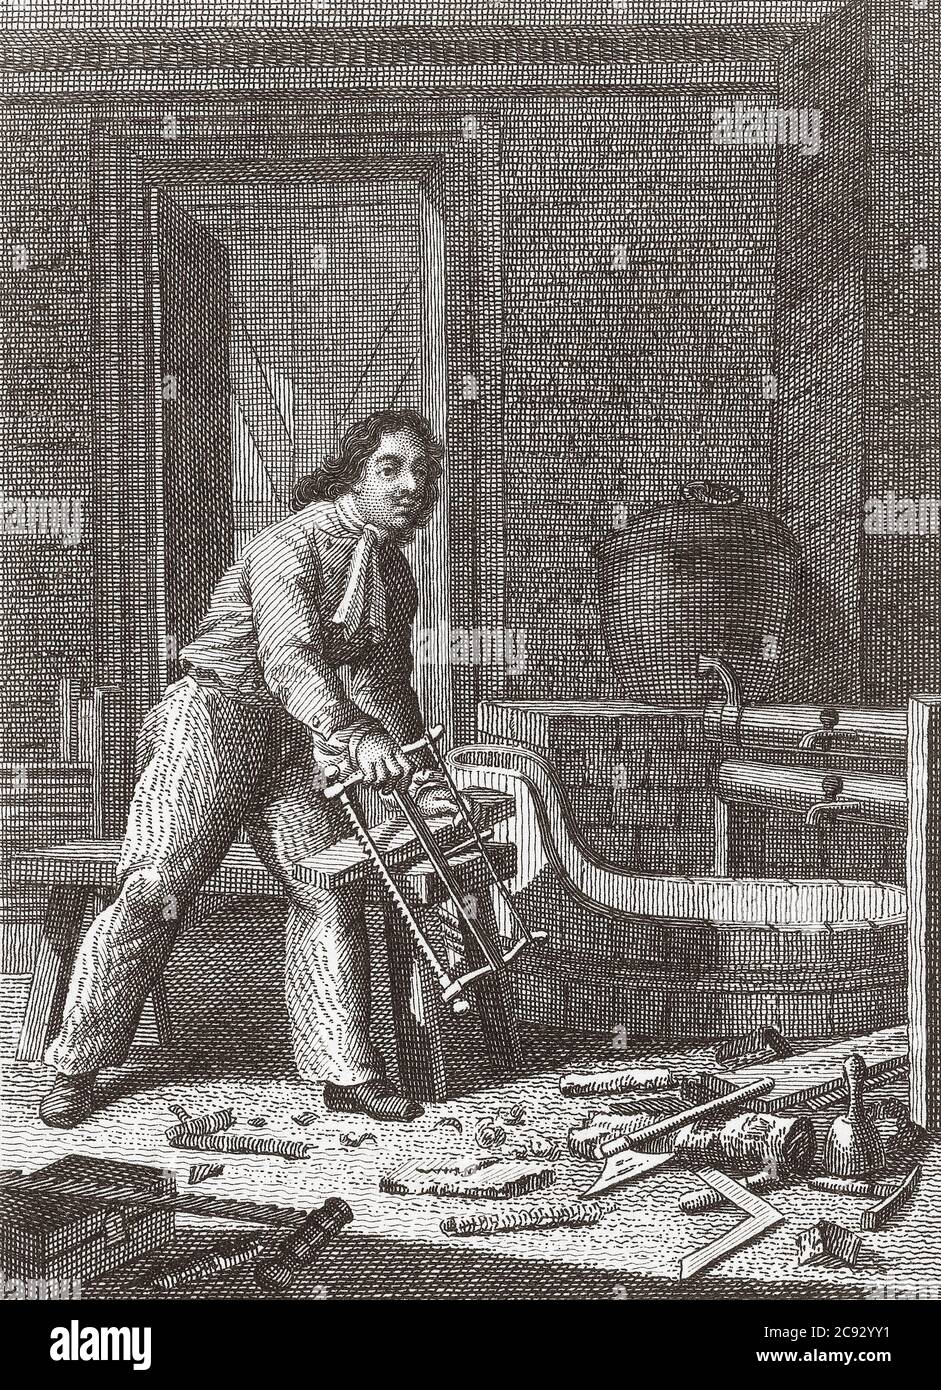 Peter the Great, Peter I or Pyotr Alexeyevich Romanov, 1672 – 1725.  Tsar of Russia.  Here seen working at carpentry in his house an Zaandam, Netherlands.  Peter spent time at Zaandam in 1697 studying ship building.  He lived in a small wooden house which today is a museum known as the Czar Peter House.  From a print by Meno Haas after a work by Schubert. Stock Photo